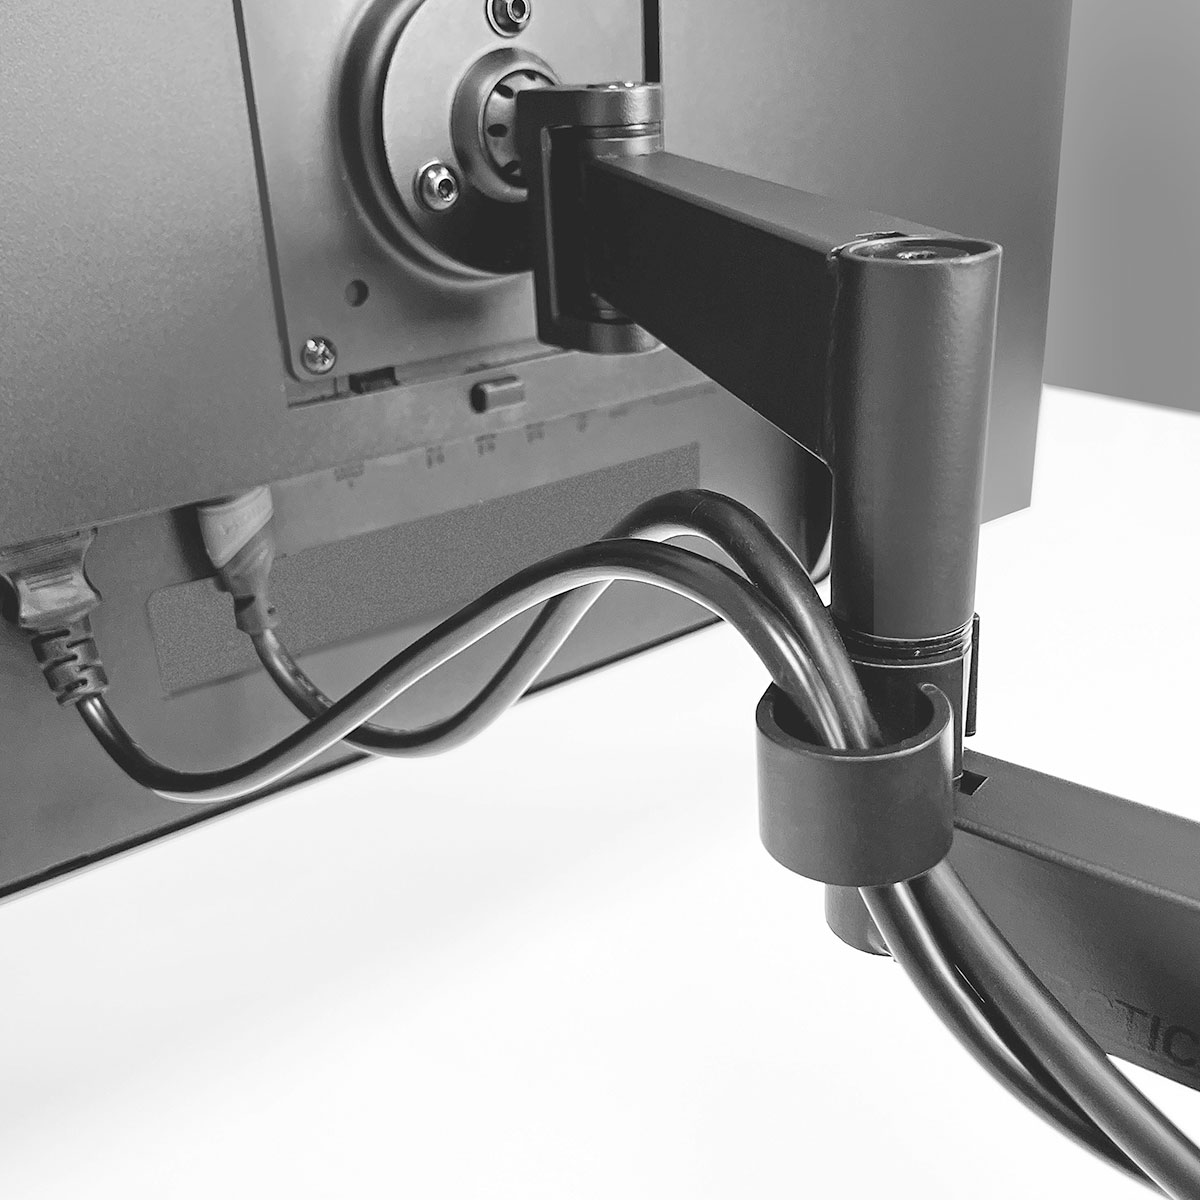 With the X1, tangled cables around monitors are a thing of the past